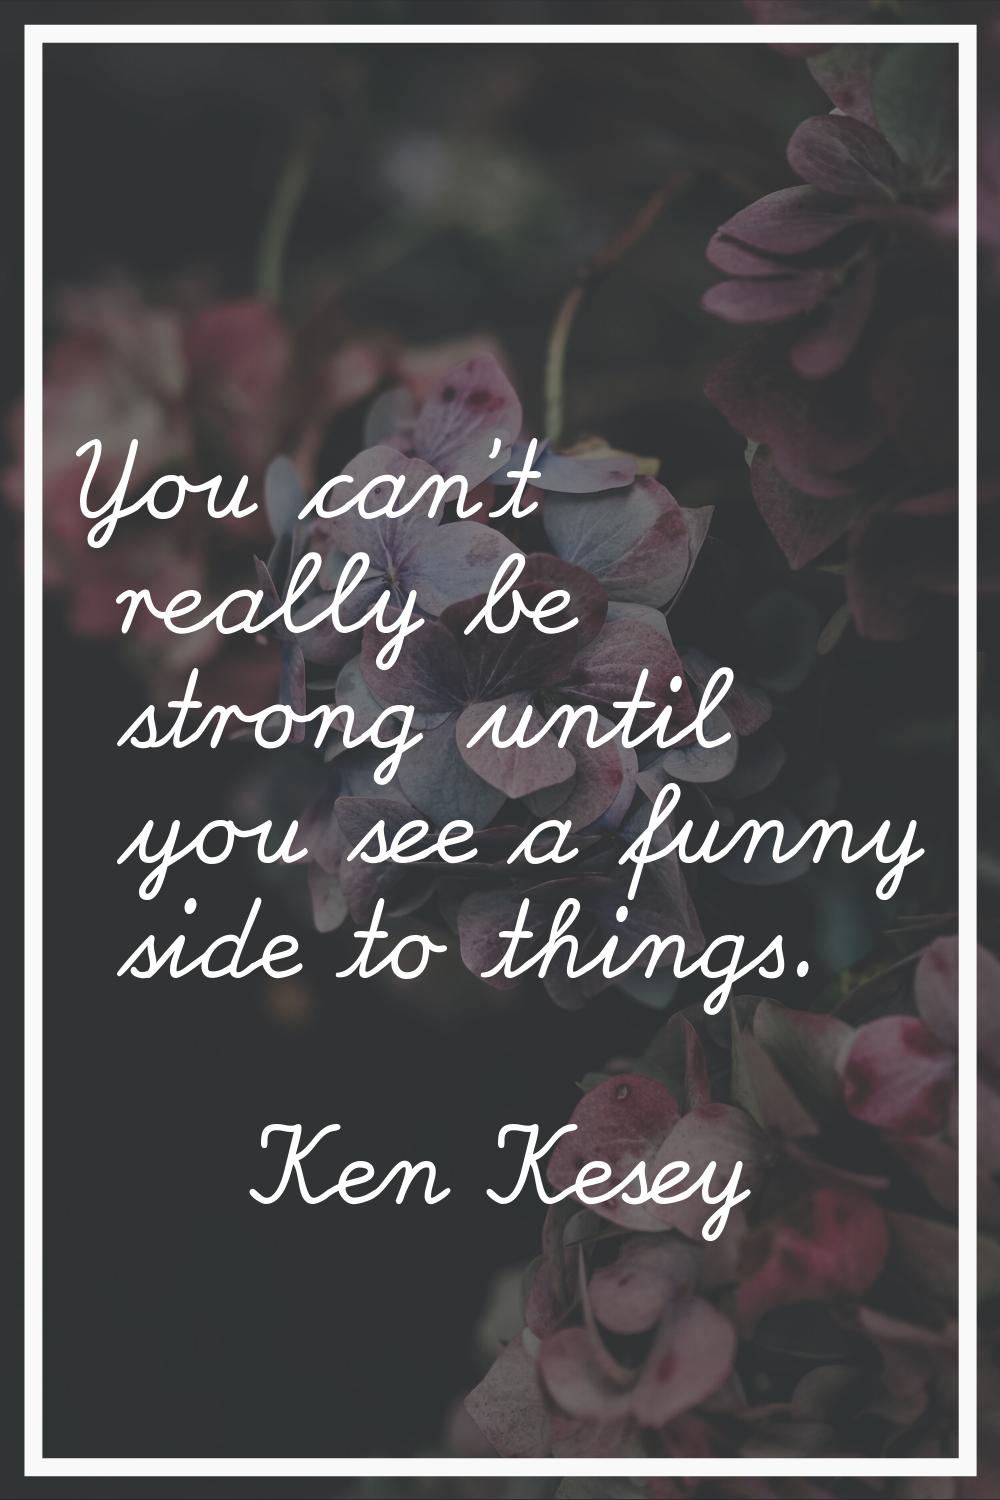 You can't really be strong until you see a funny side to things.